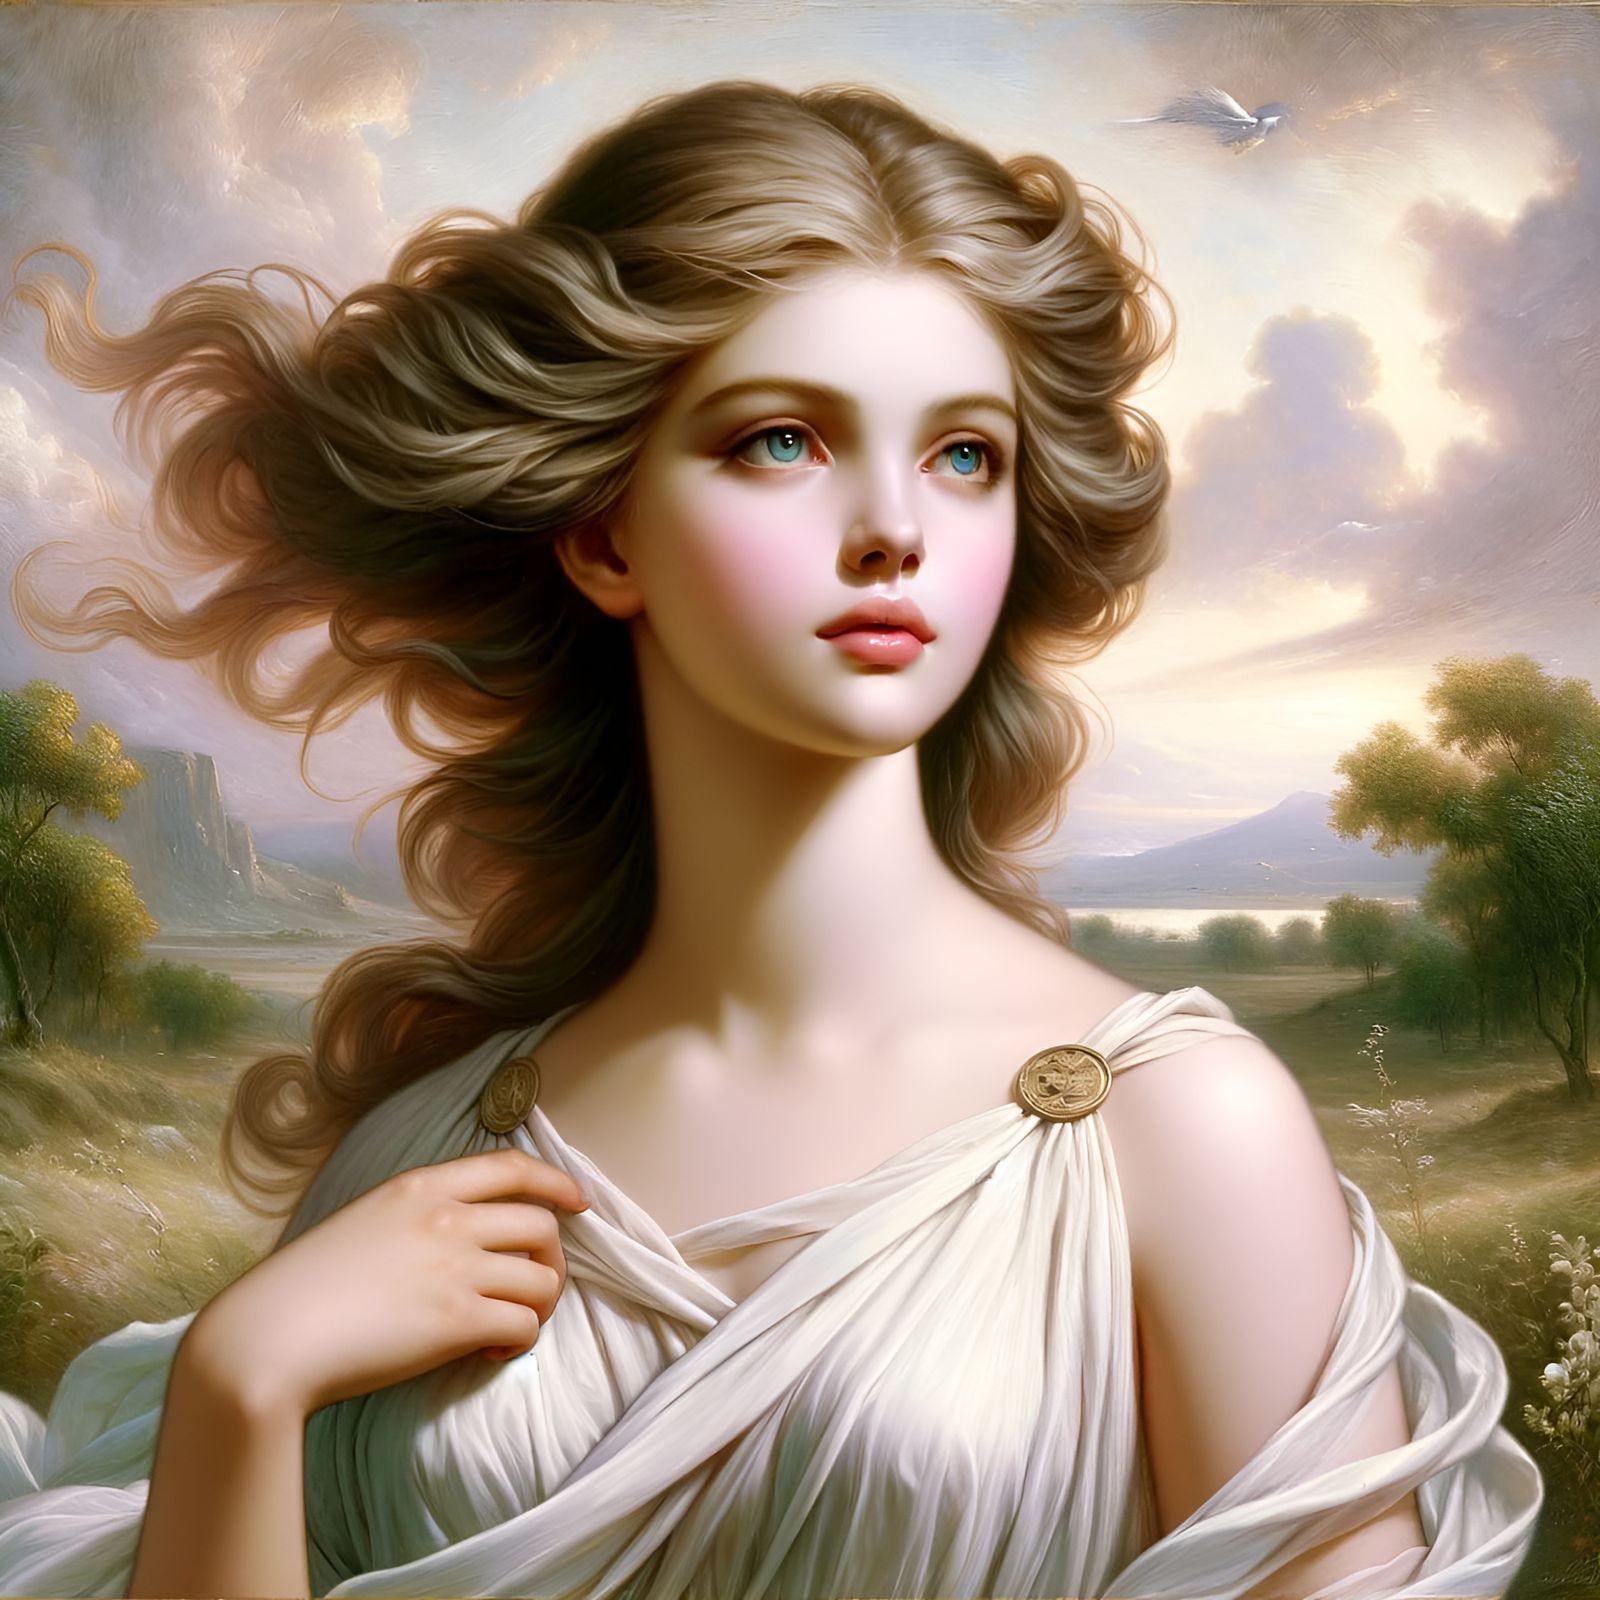 Oil painting of Goddess Seraphina the goddess embodies eternal youth ...